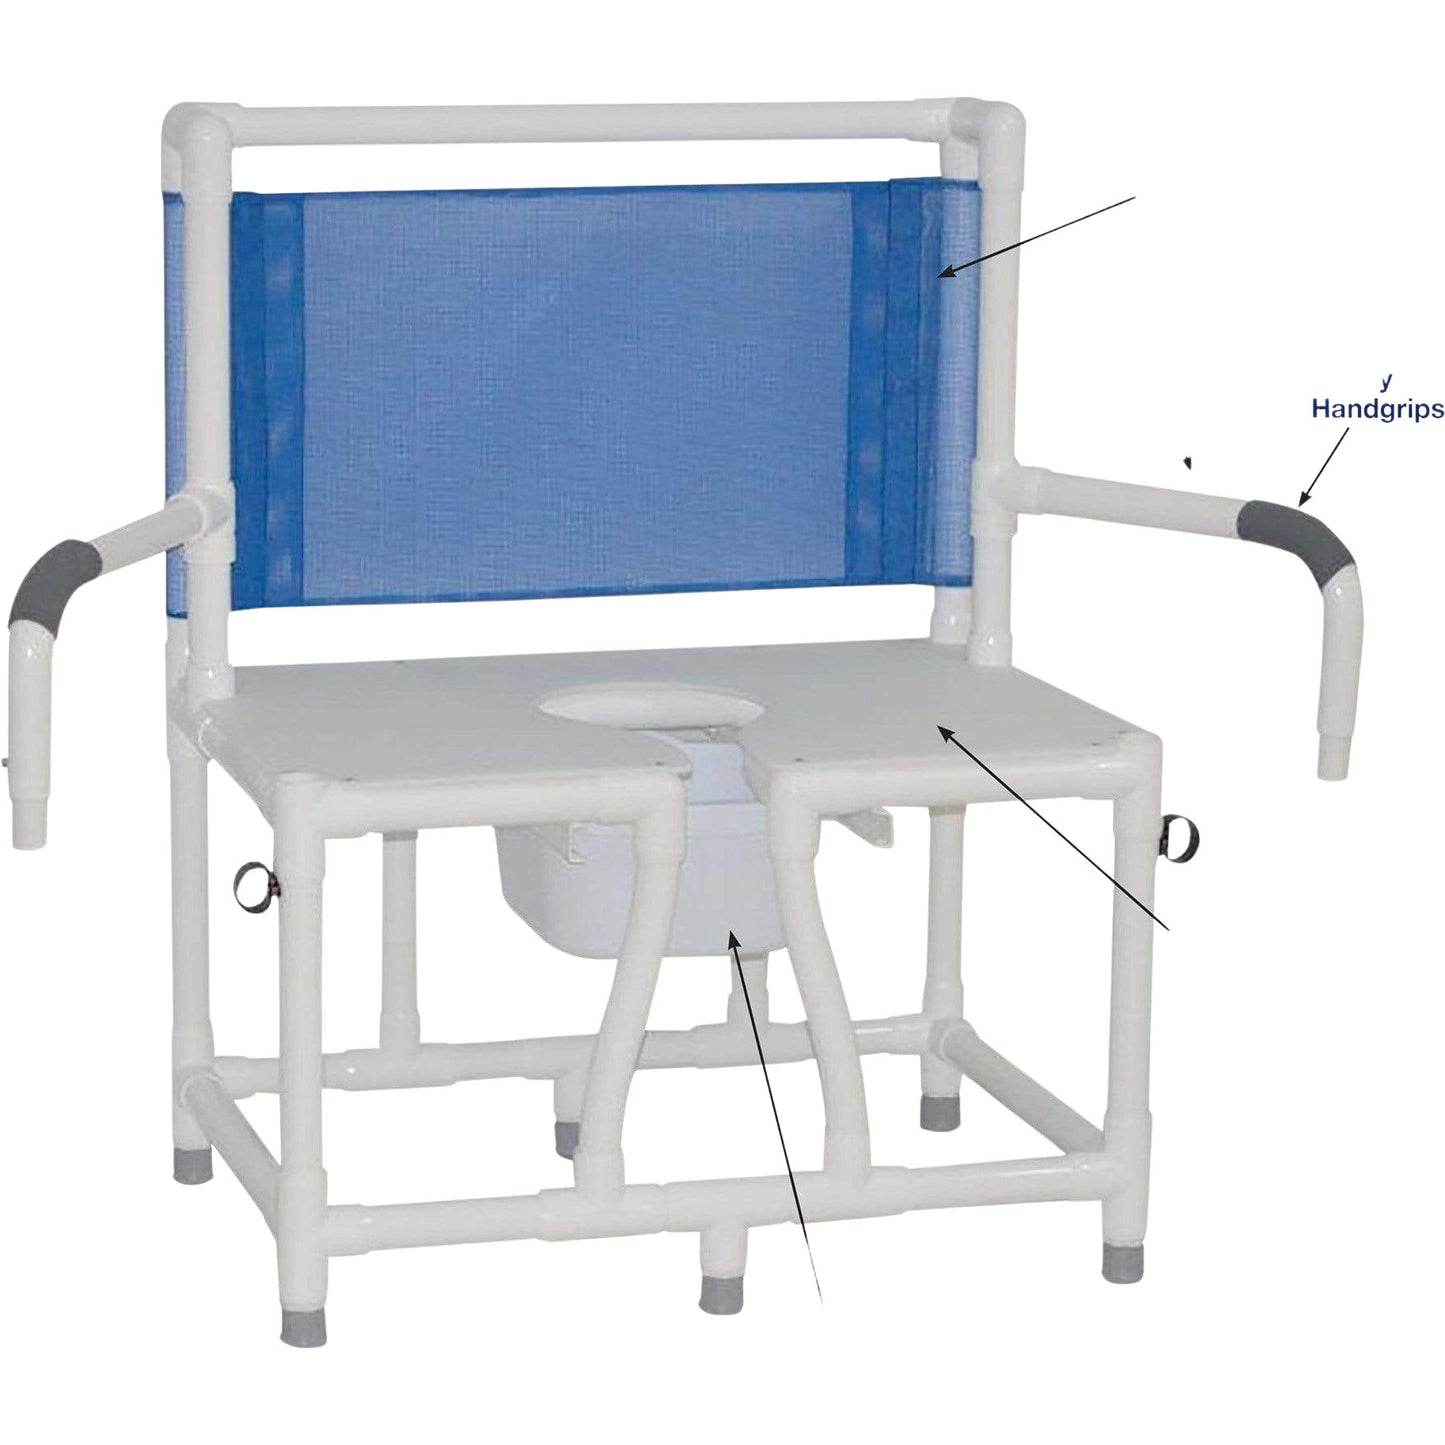 ConvaQuip Bedside Commodes - PVC Bariatric Bedside Commode - Swing Away Arms Model 130-C10-DDA by ConvaQuip